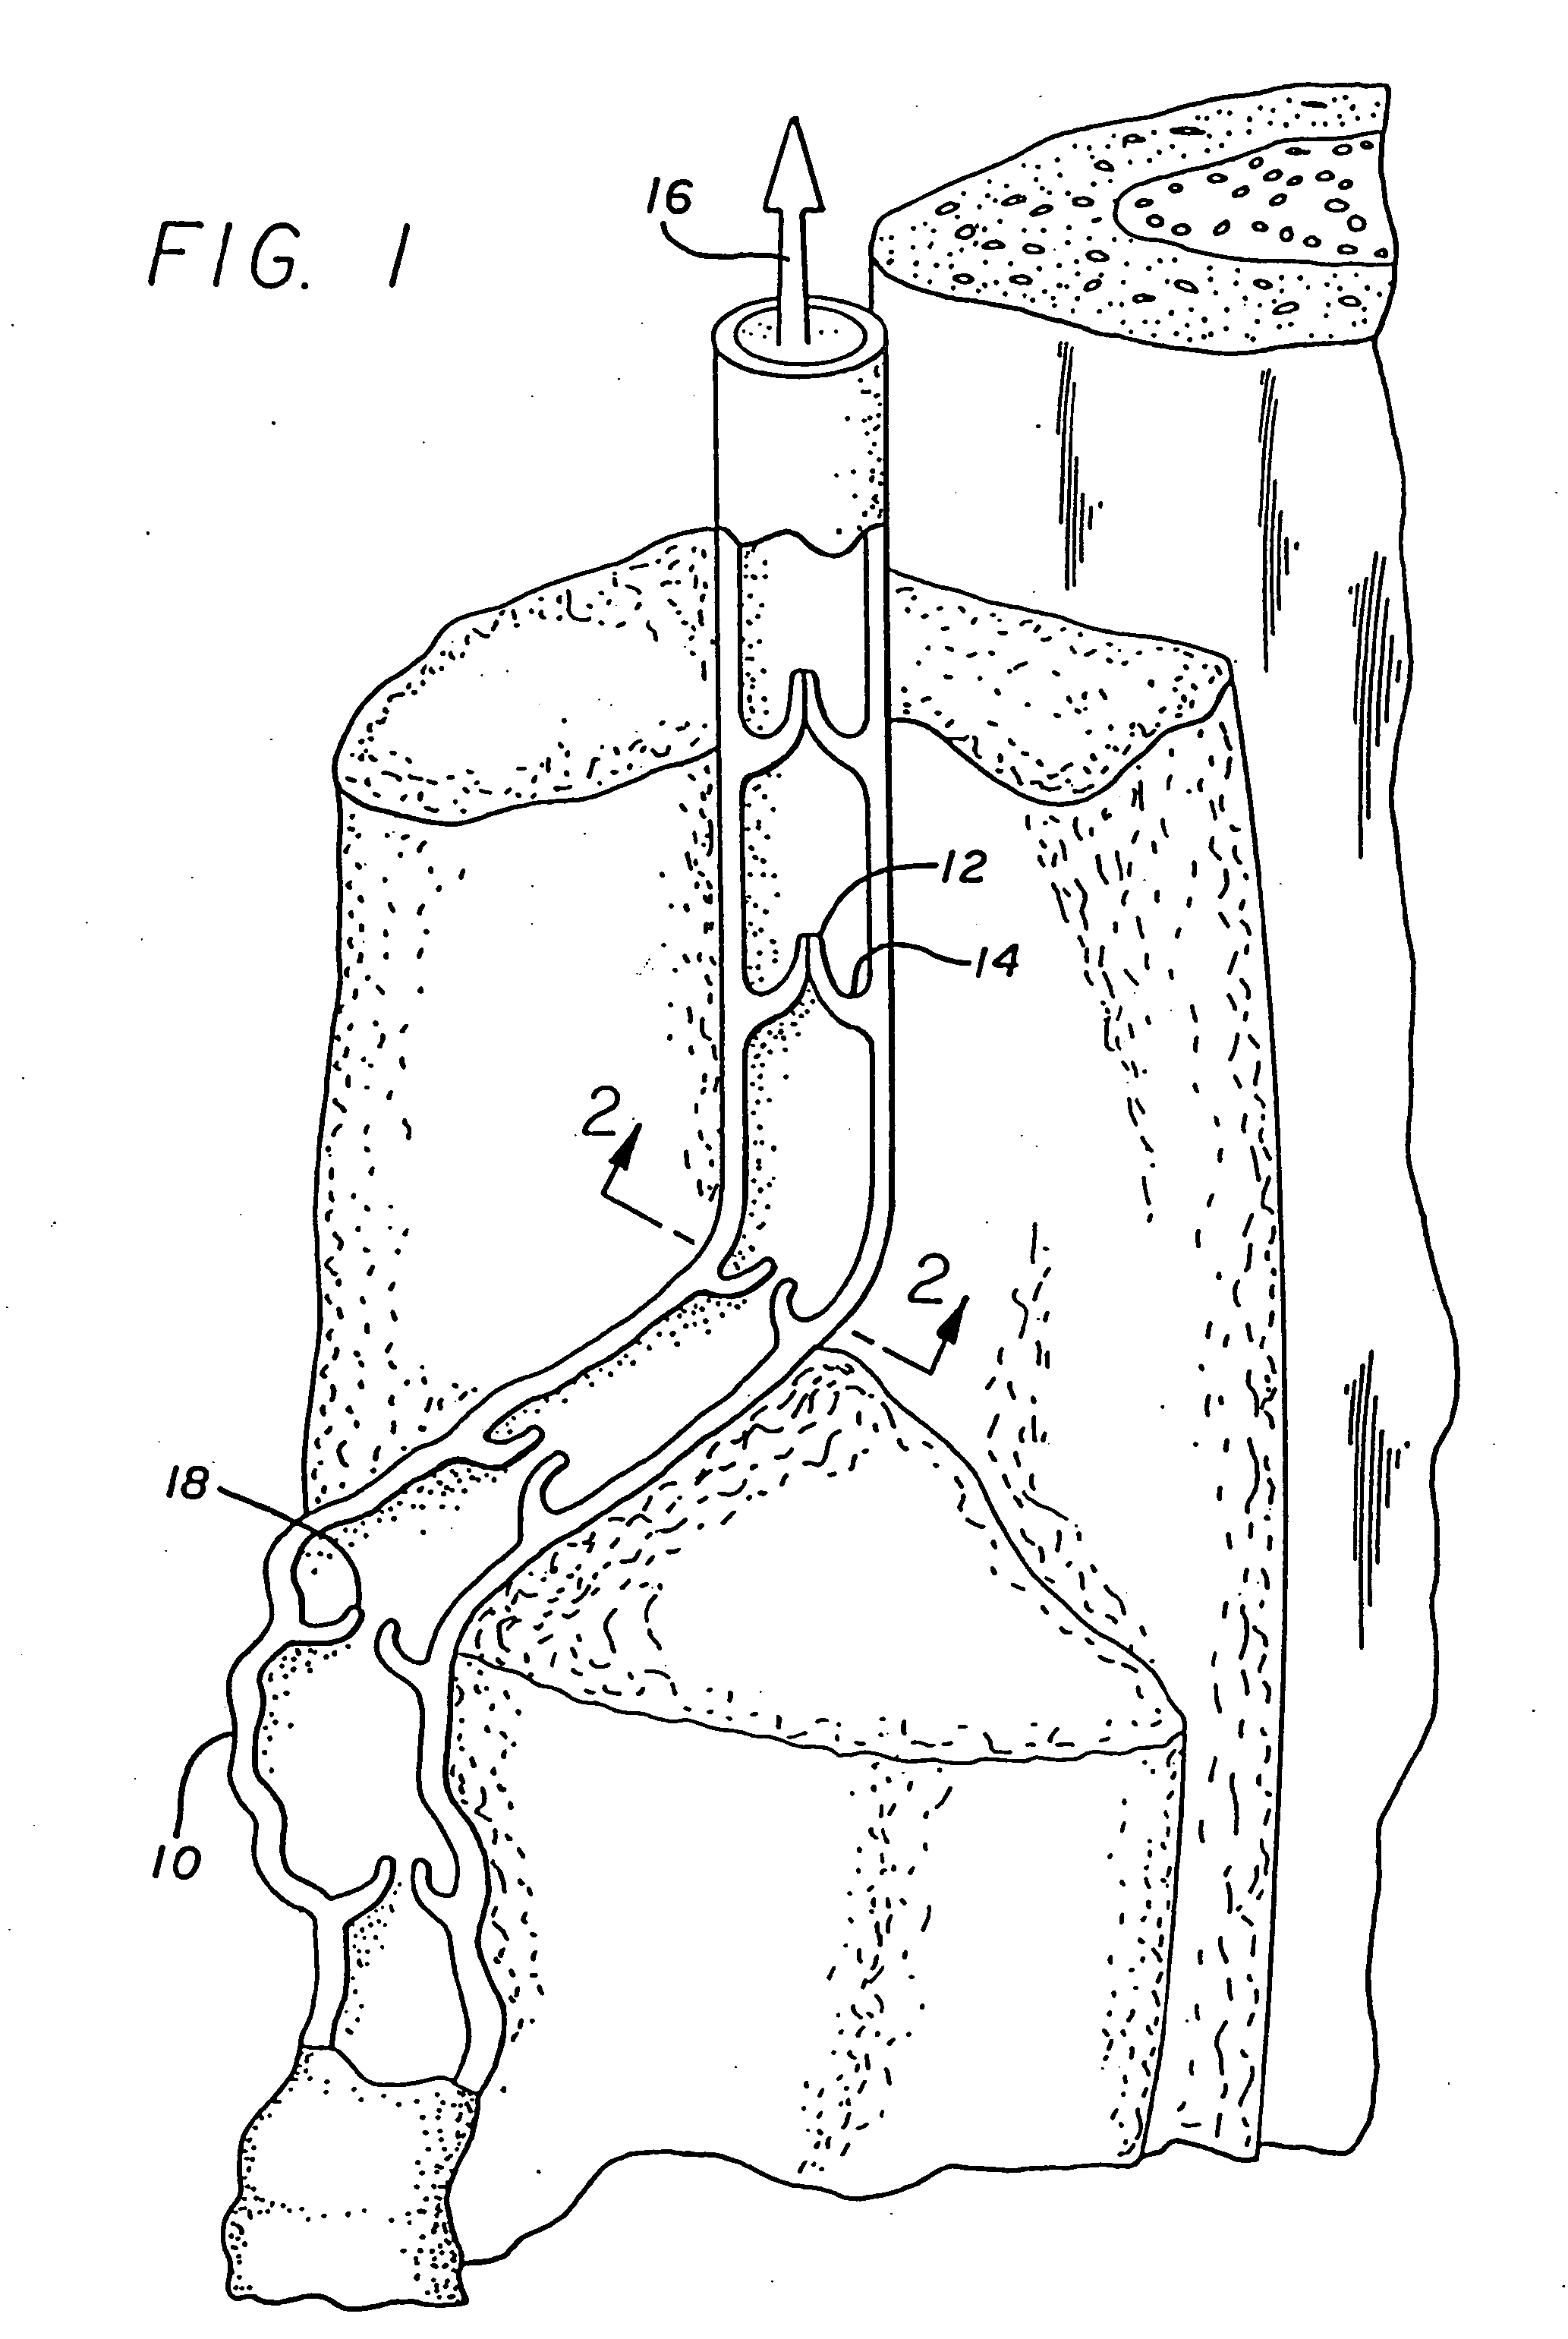 Apparatus for Treating Venous Insufficiency Using Directionally Applied Energy